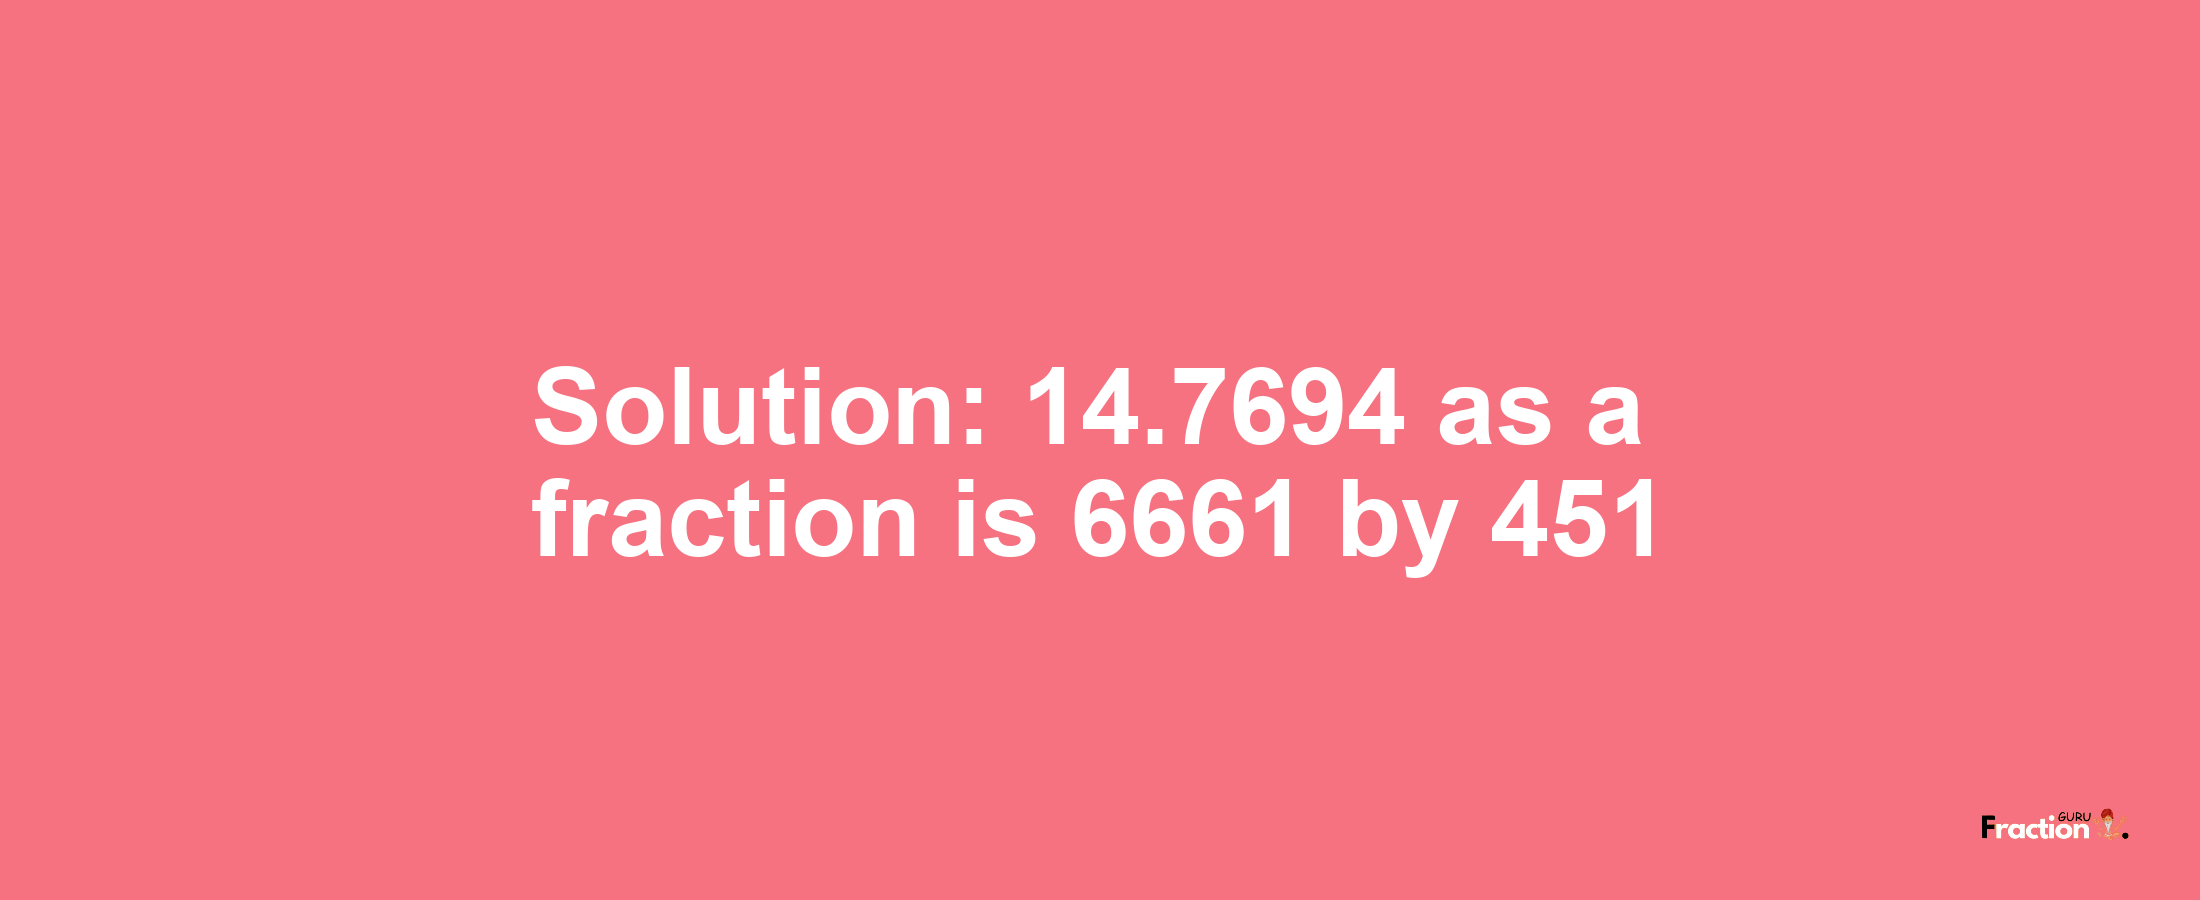 Solution:14.7694 as a fraction is 6661/451